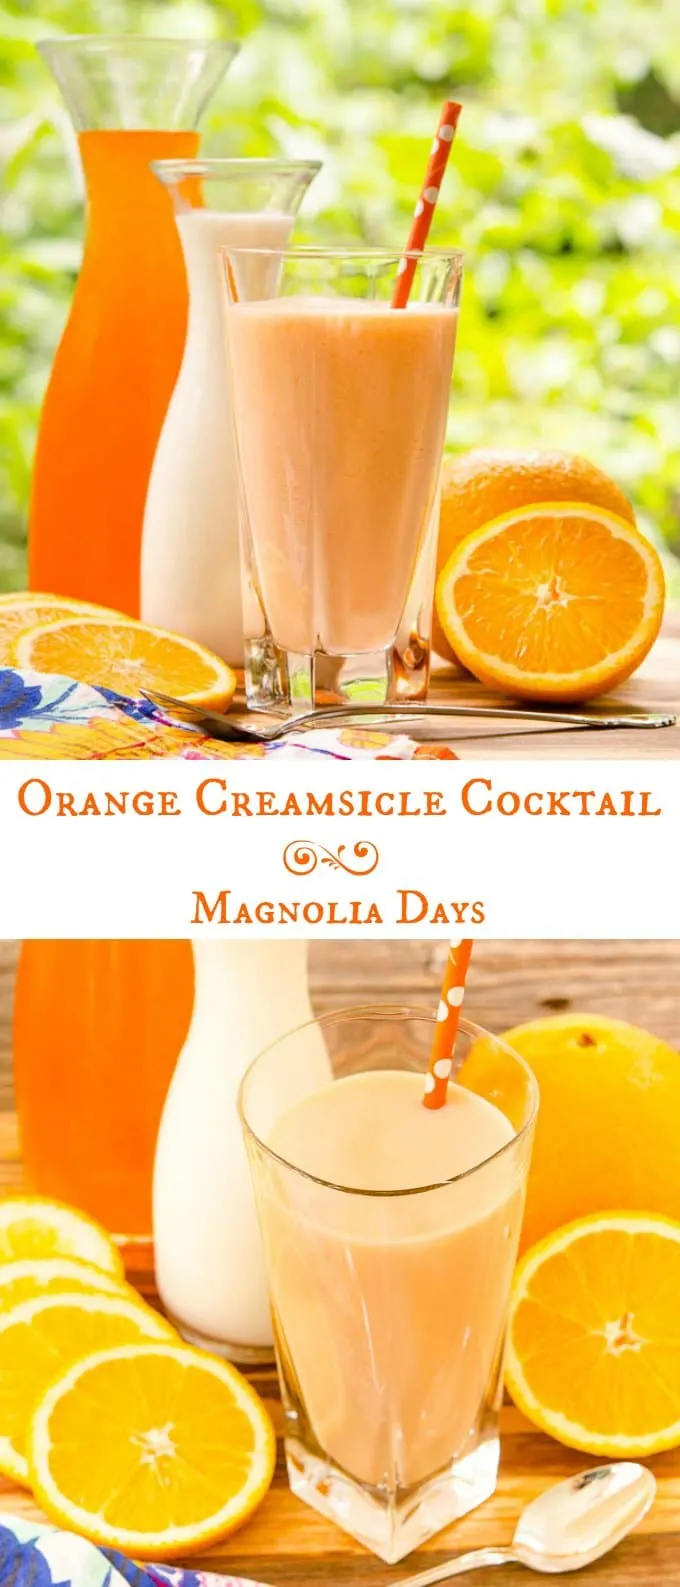 Orange Creamsicle Cocktail is an easy to make, cool and creamy drink that tastes like the classic popsicle. All you have to do is stir, sip, and enjoy!